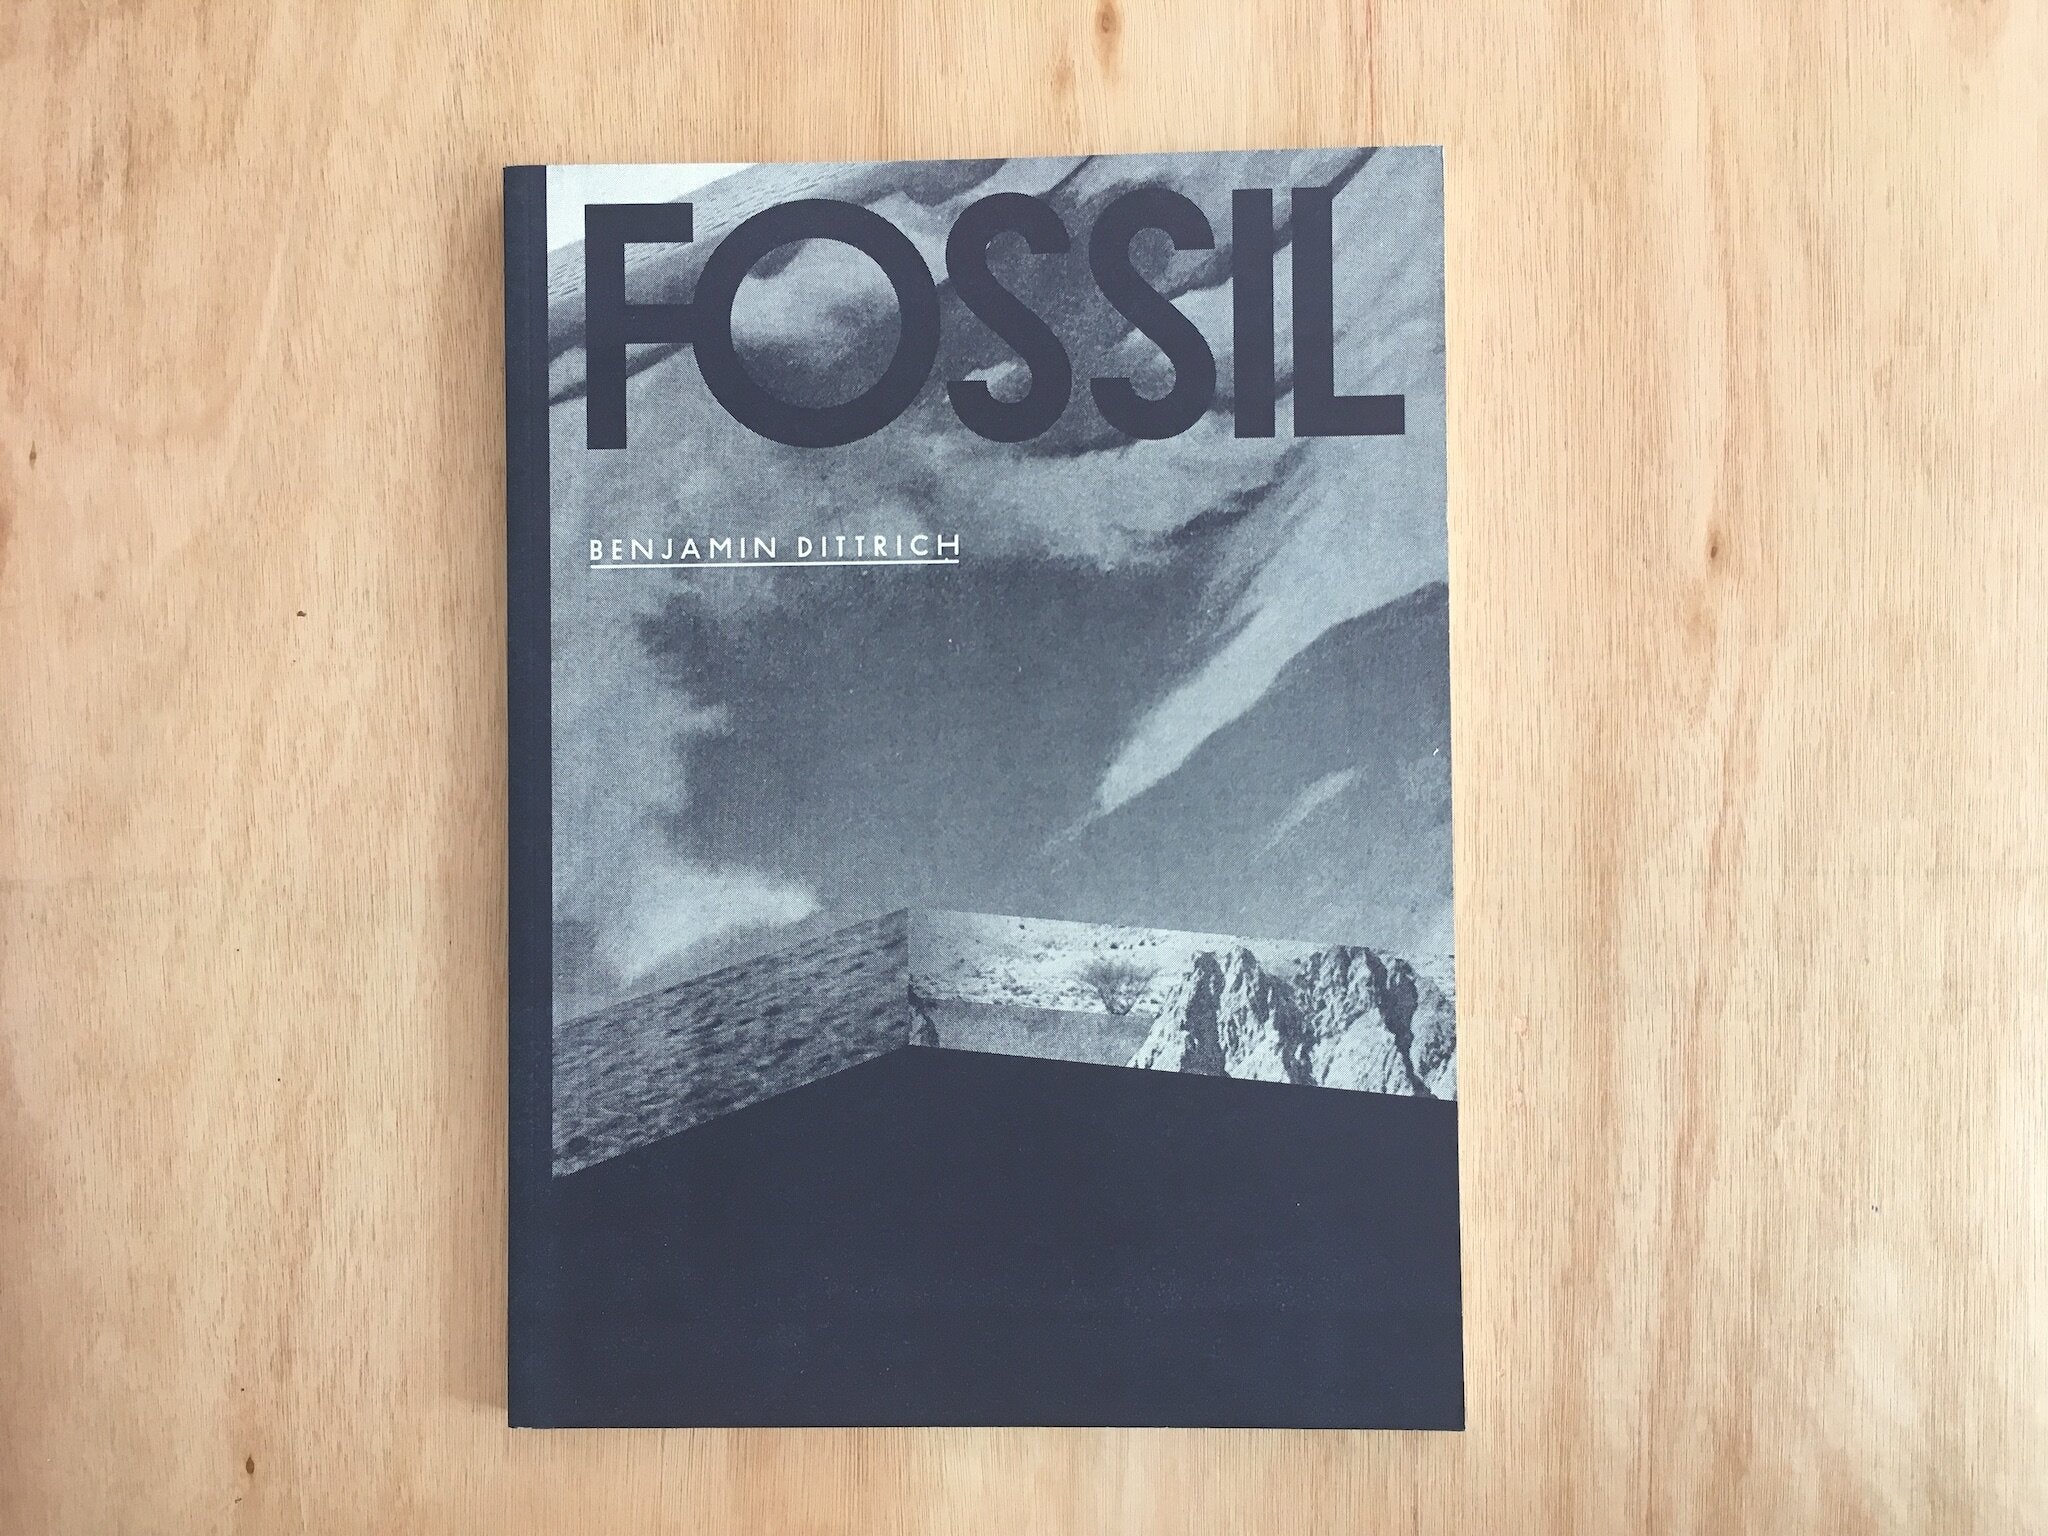 FOSSIL by Benjamin Dittrich